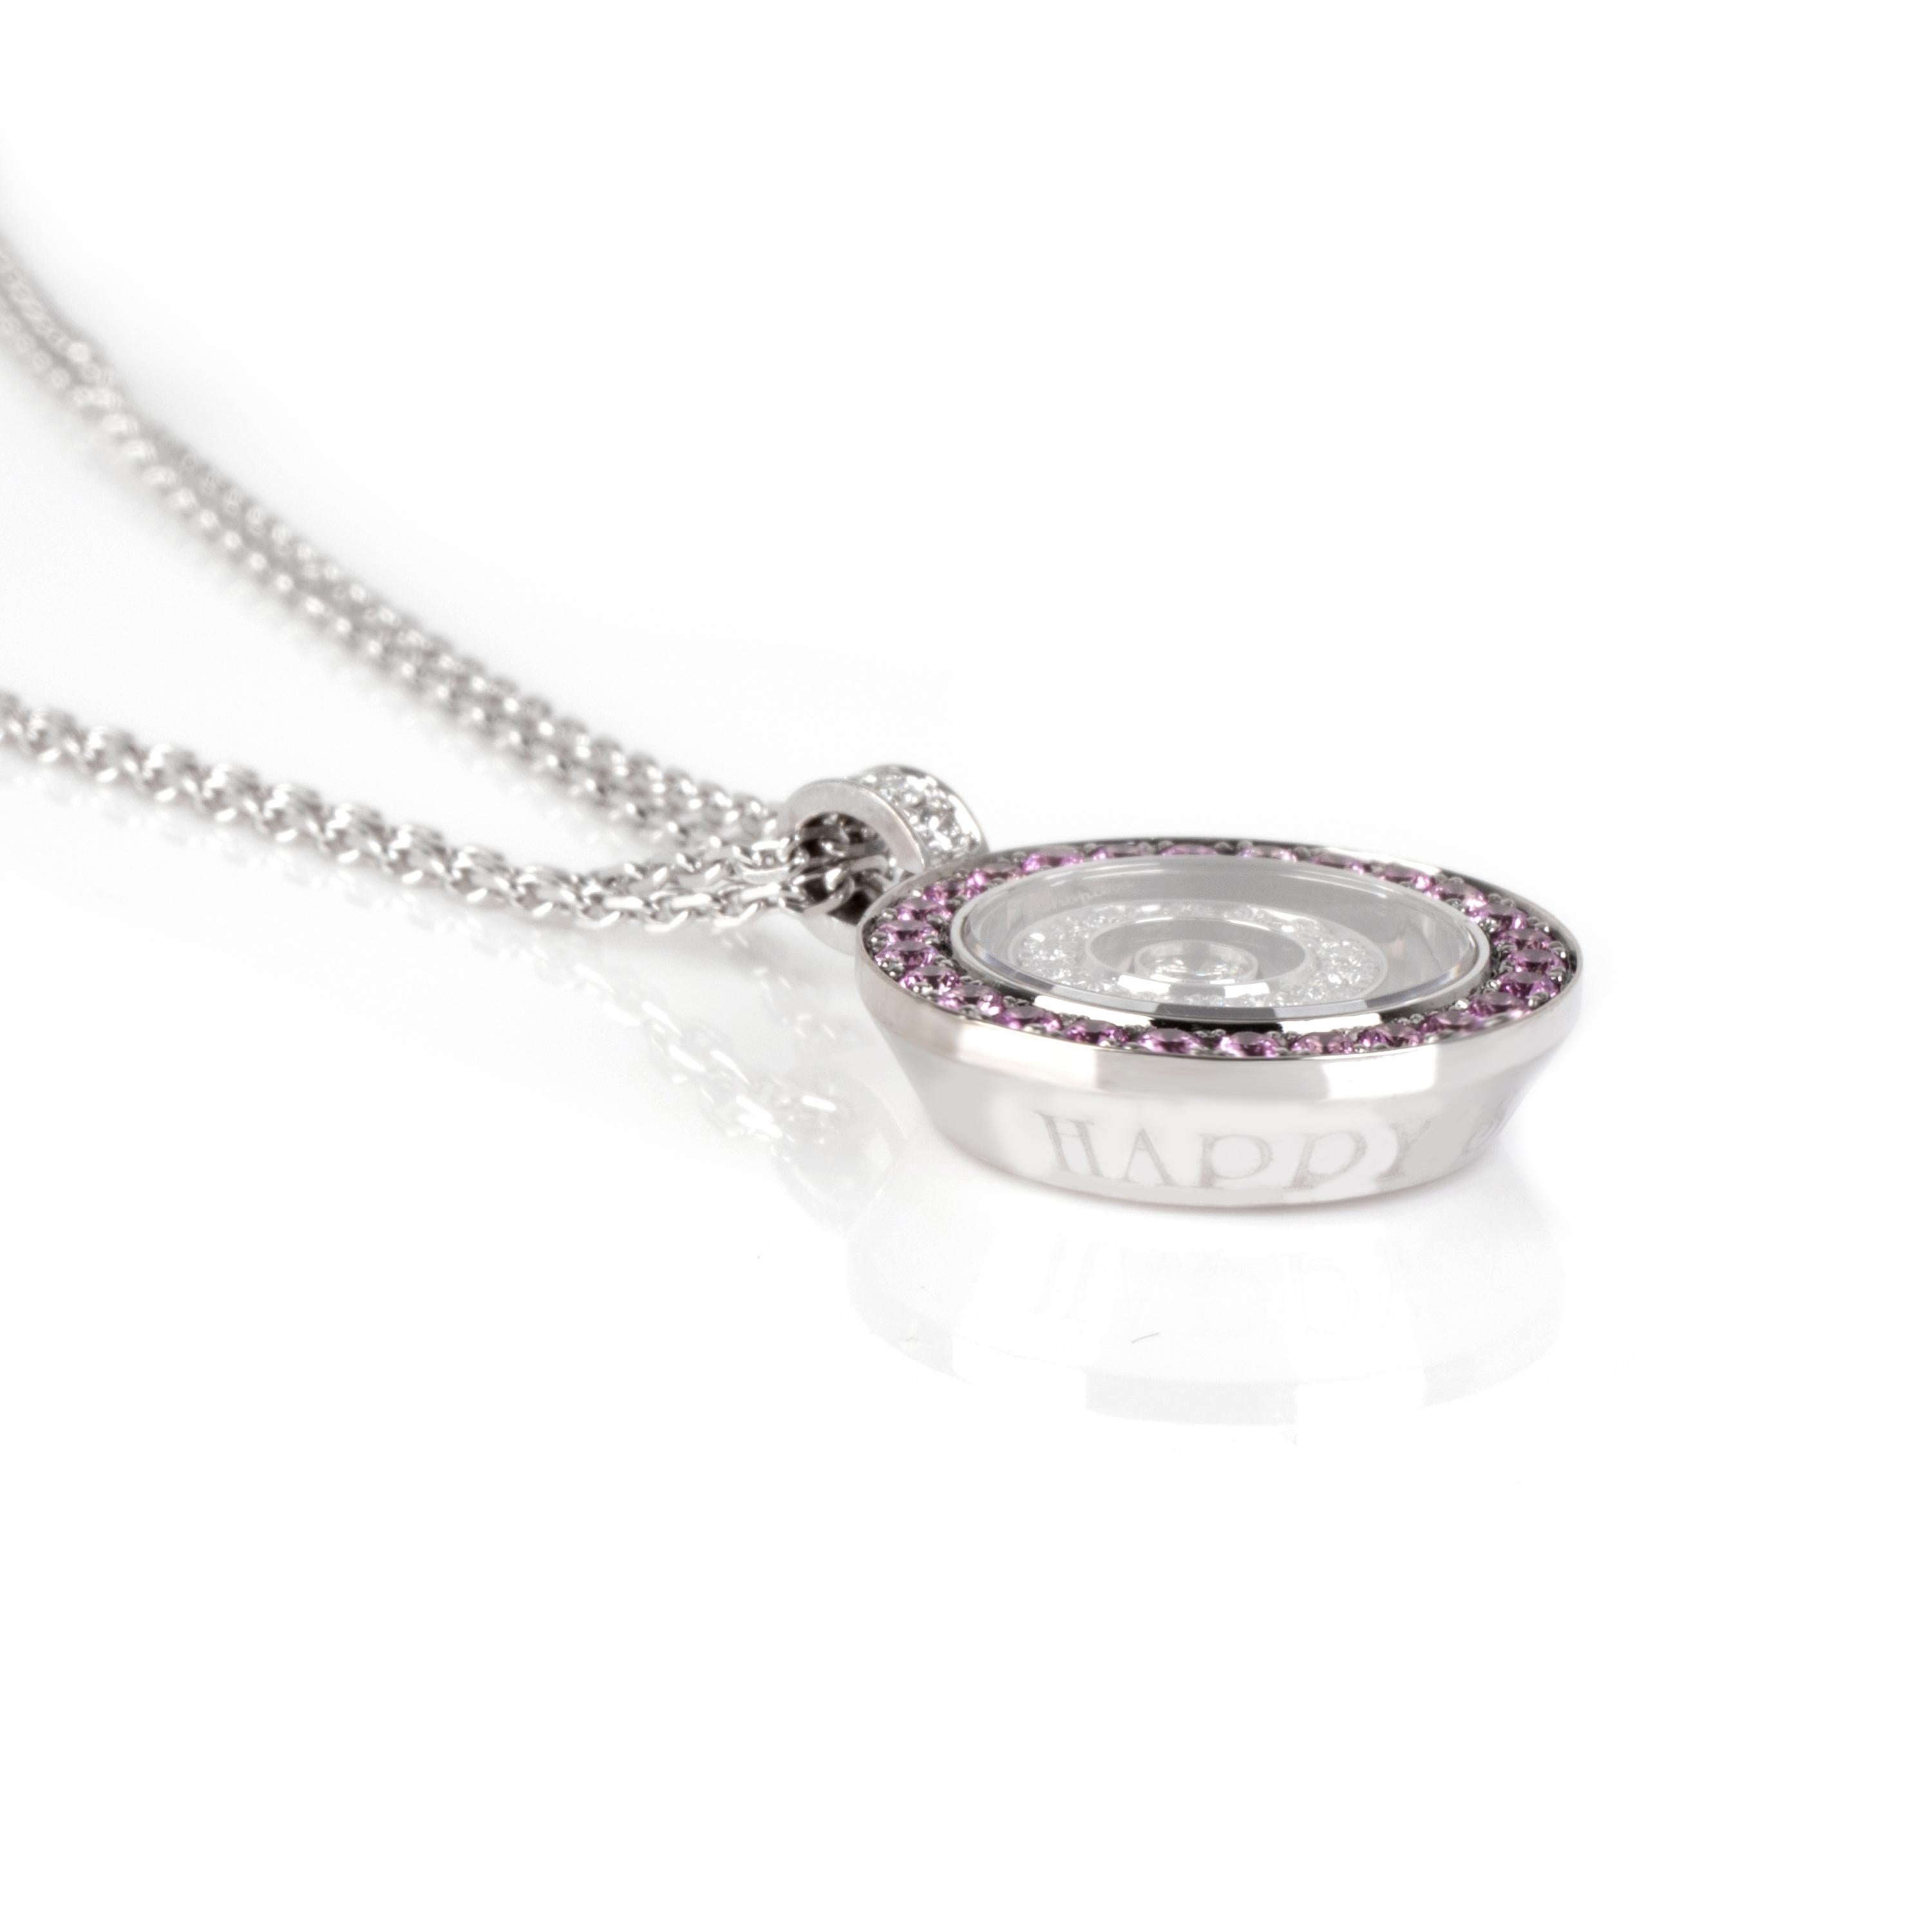 Chopard Happy Spirit Diamond Necklace in 18K White Gold 0.33 CTW

PRIMARY DETAILS

SKU: 104959

Condition Description: Retails for 7200 USD. In excellent condition and recently polished. Chain is 16 inches in length. Comes with the original